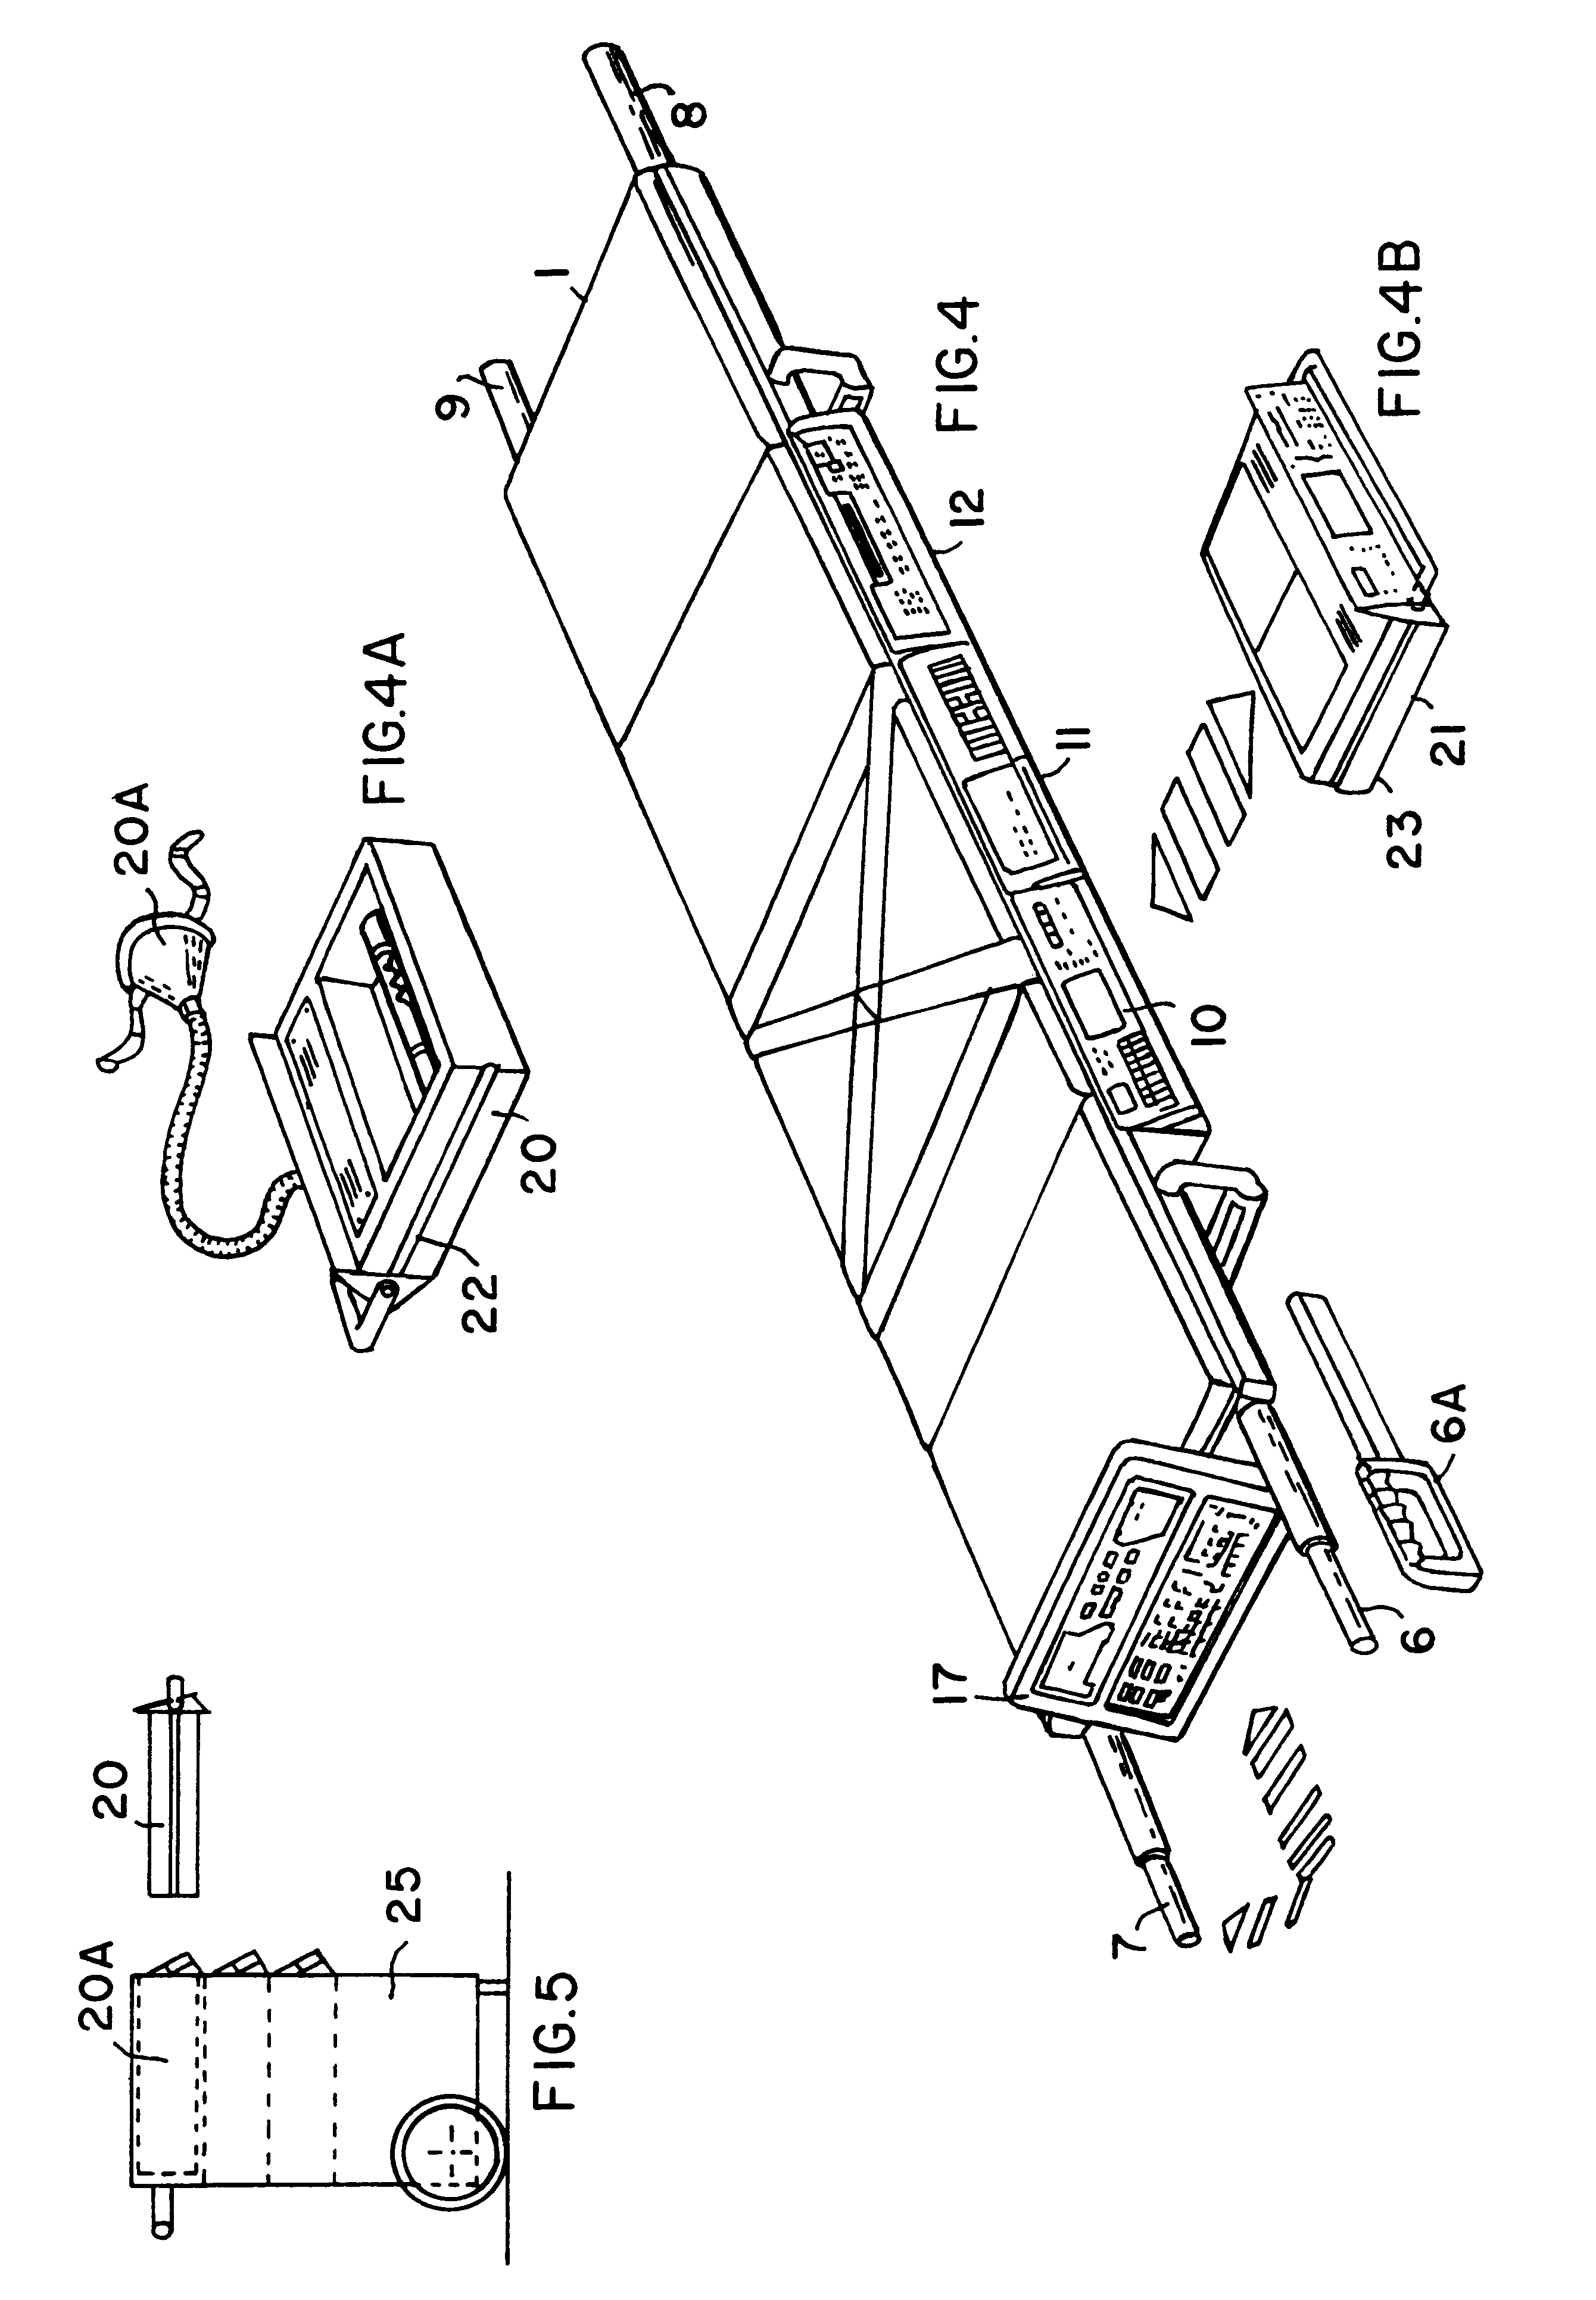 System for transporting a sick or injured person to a medical facility